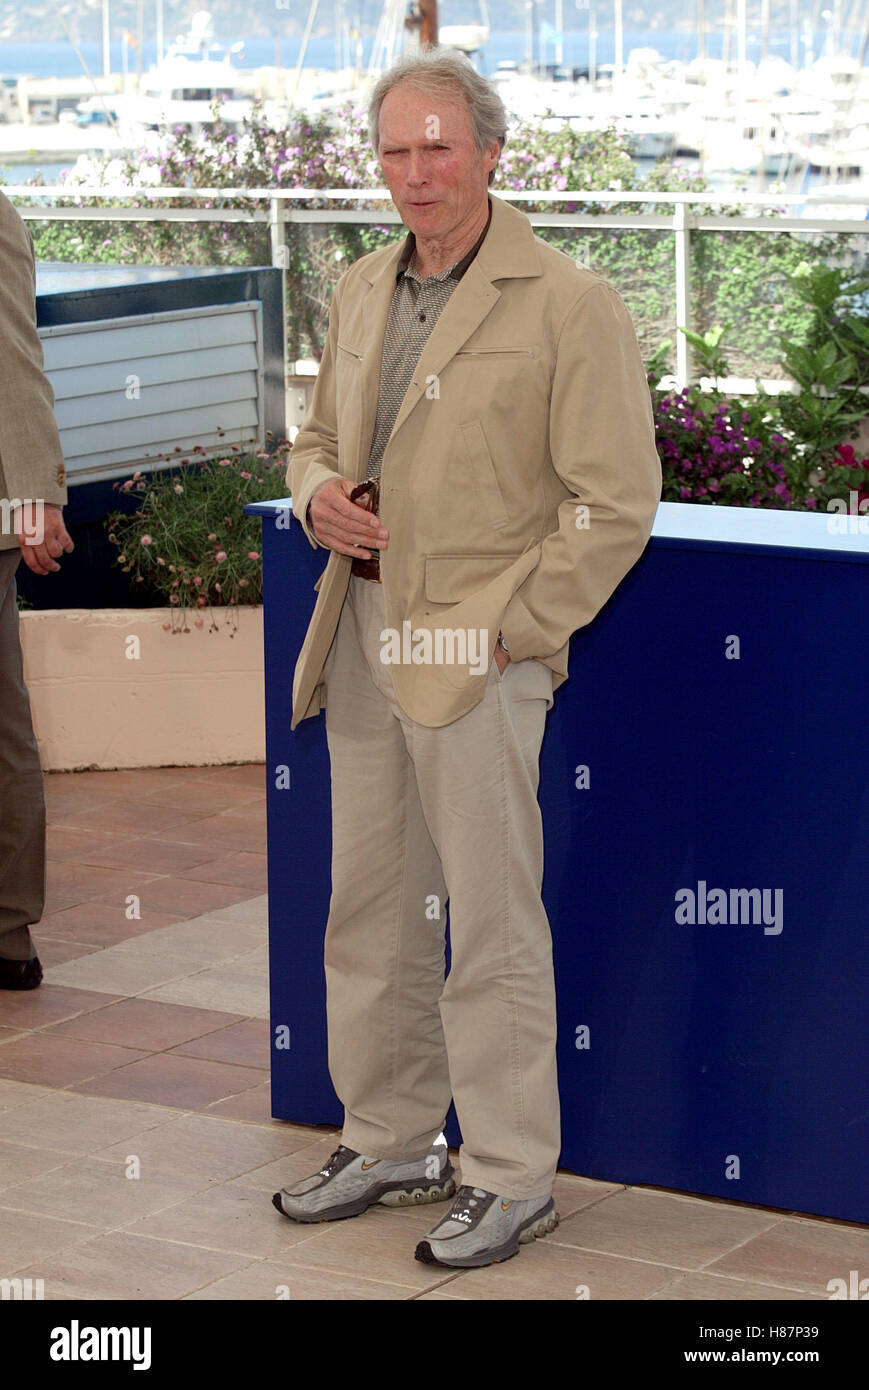 CLINT EASTWOOD CANNES FILM FESTIVAL CANNES FRANCE 23 May 2003 Stock Photo